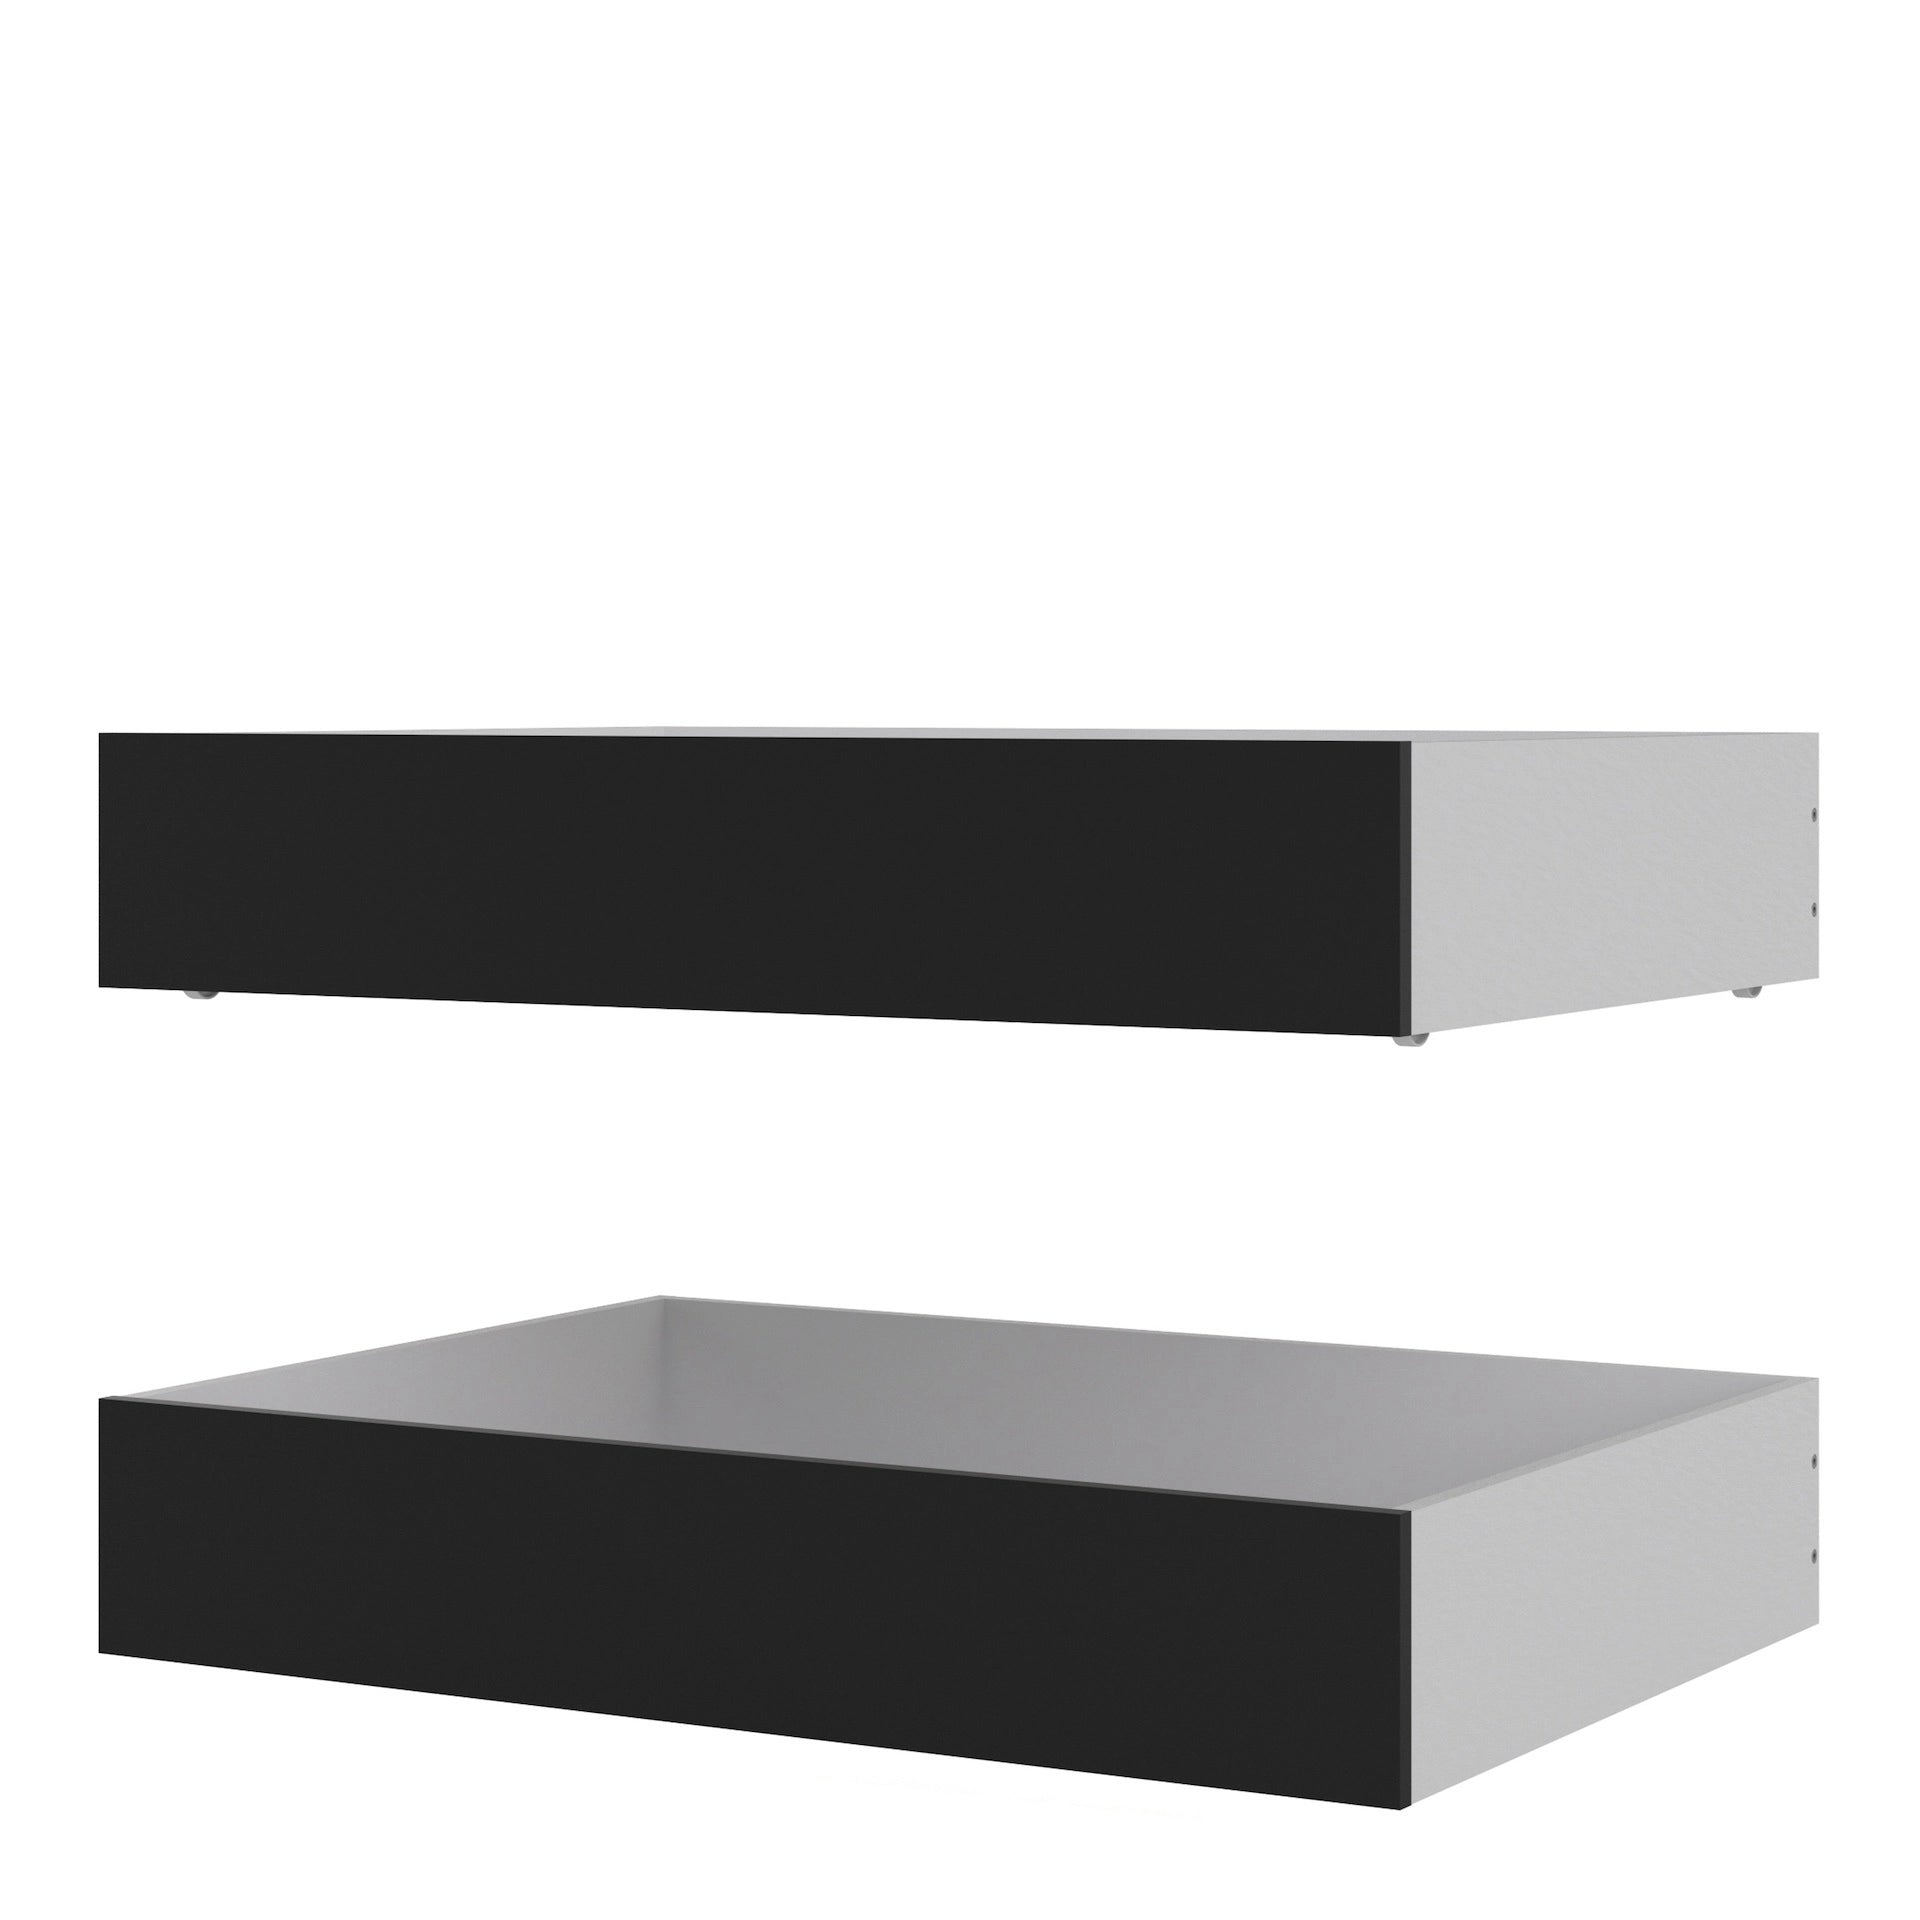 Furniture To Go Naia Set of 2 Underbed Drawers (For Single Or Double Beds) in Black Matt